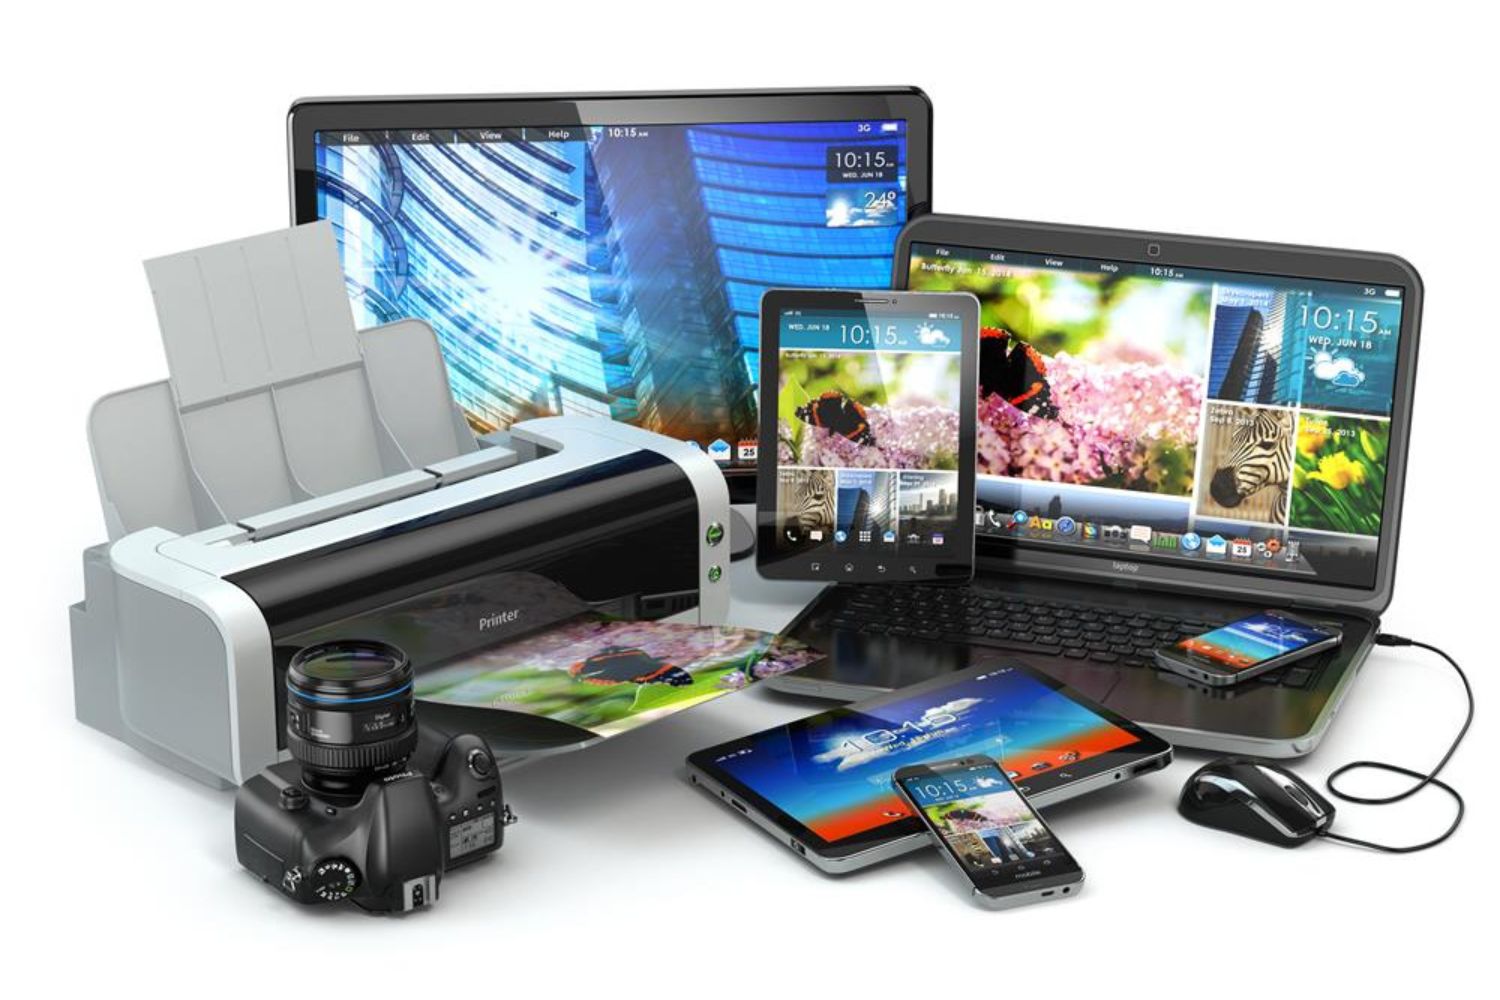 photo printer connected with laptop and phone  Photo by Maxx-Studio on shutterstock